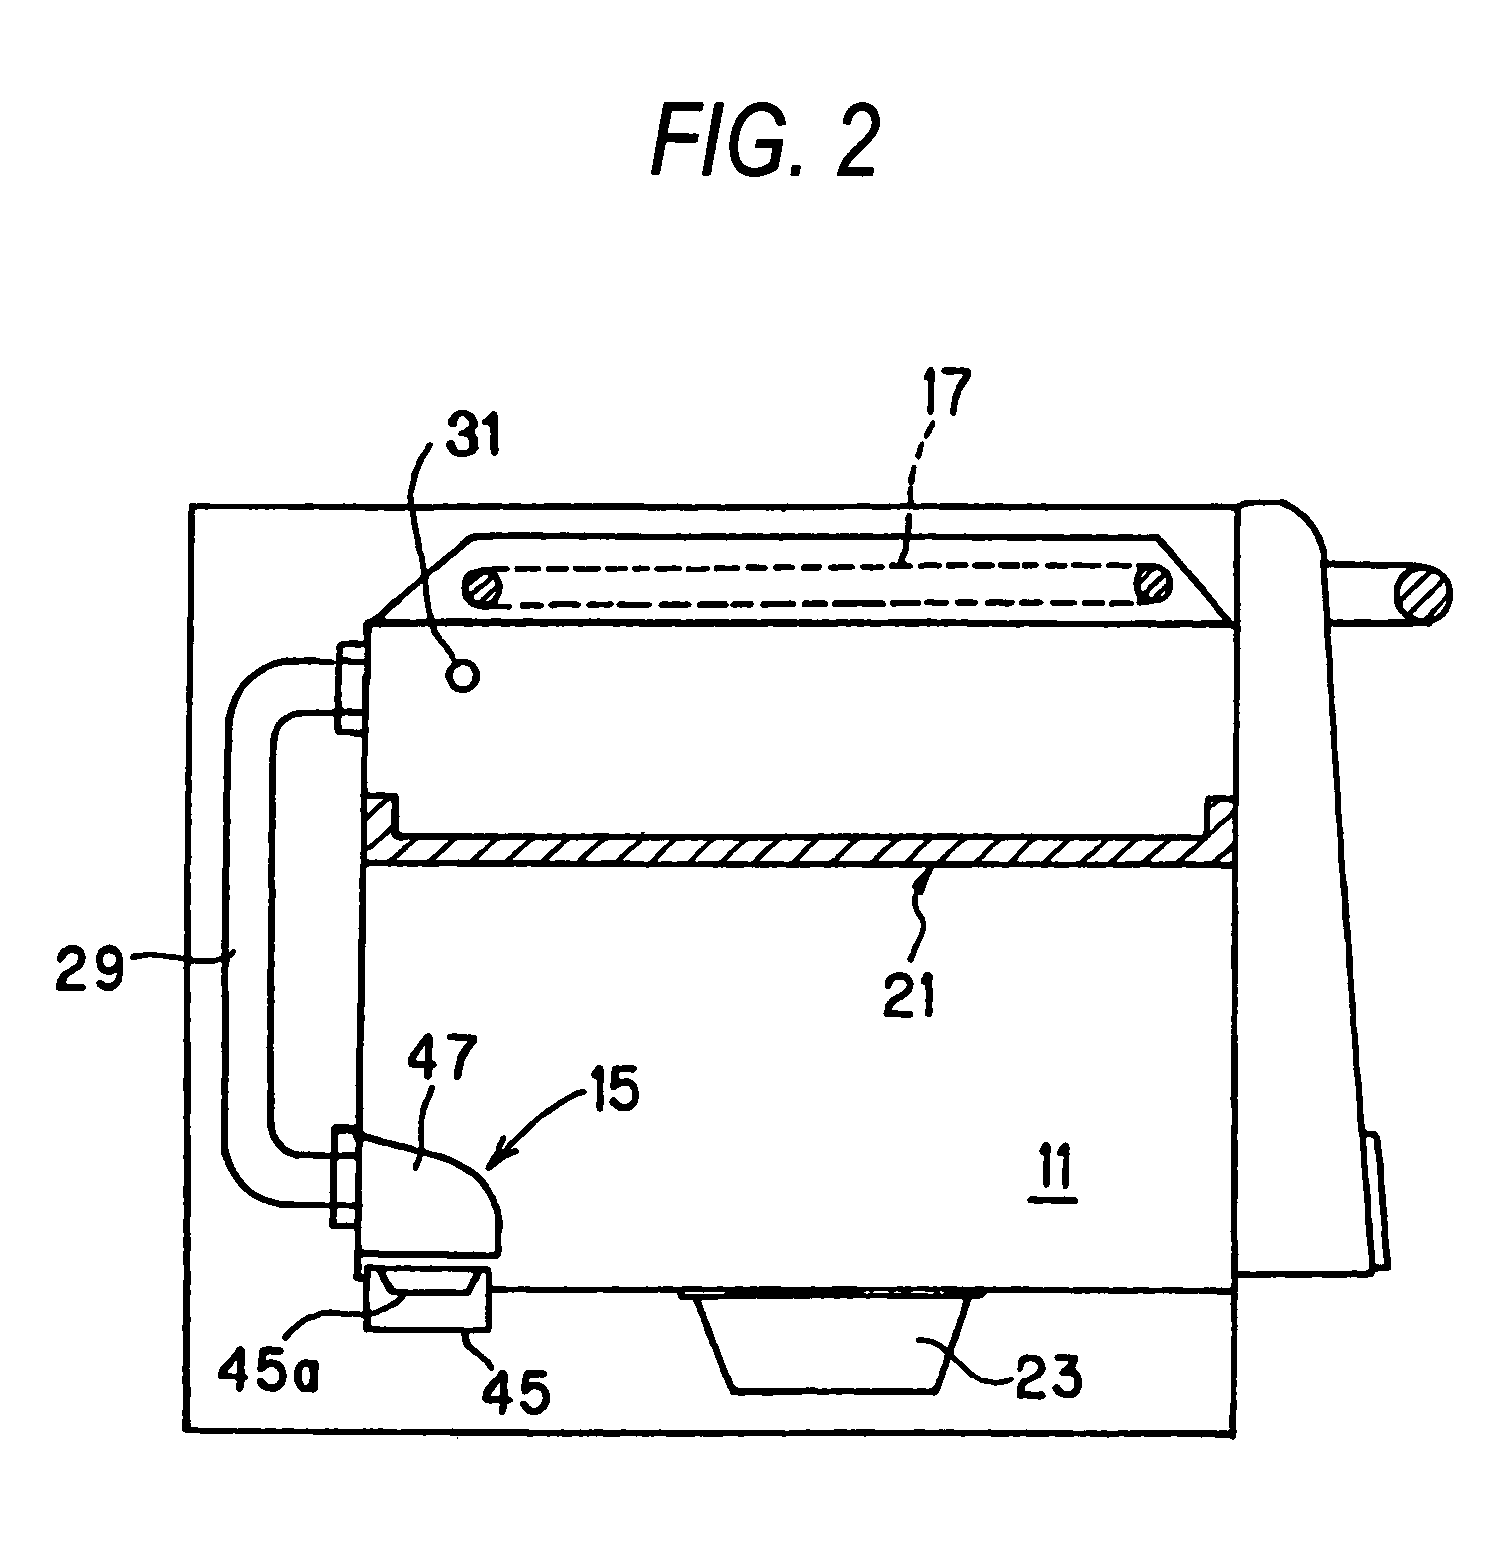 High frequency heating apparatus with steam generator